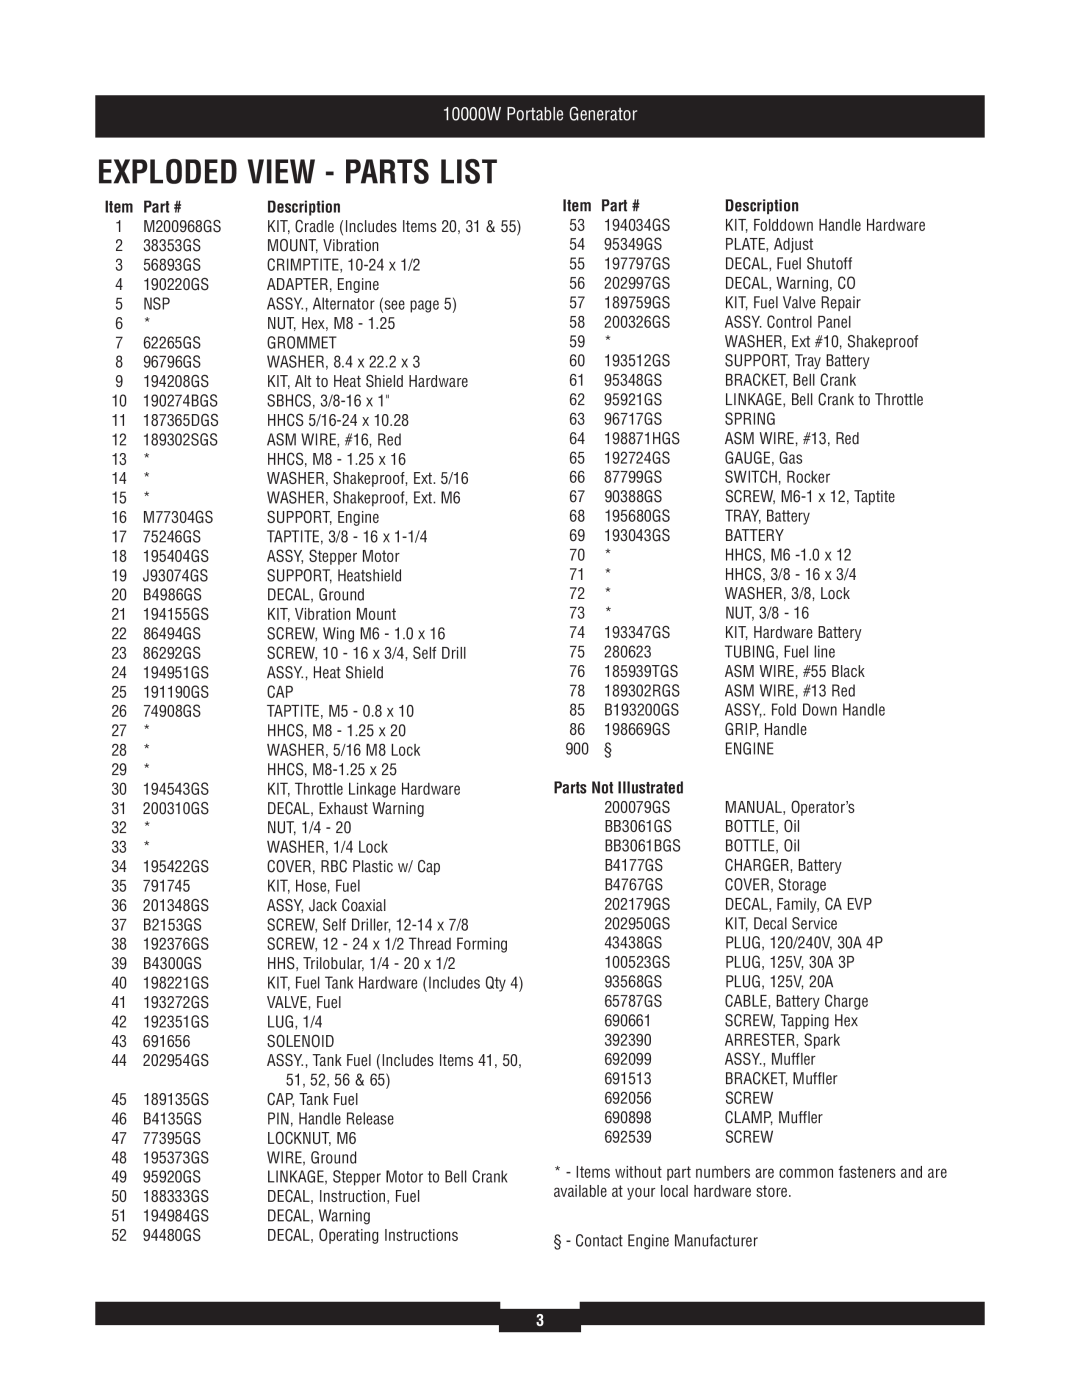 Briggs & Stratton 030384 manual Exploded View - Parts List, 10000W Portable Generator, Description, Parts Not Illustrated 